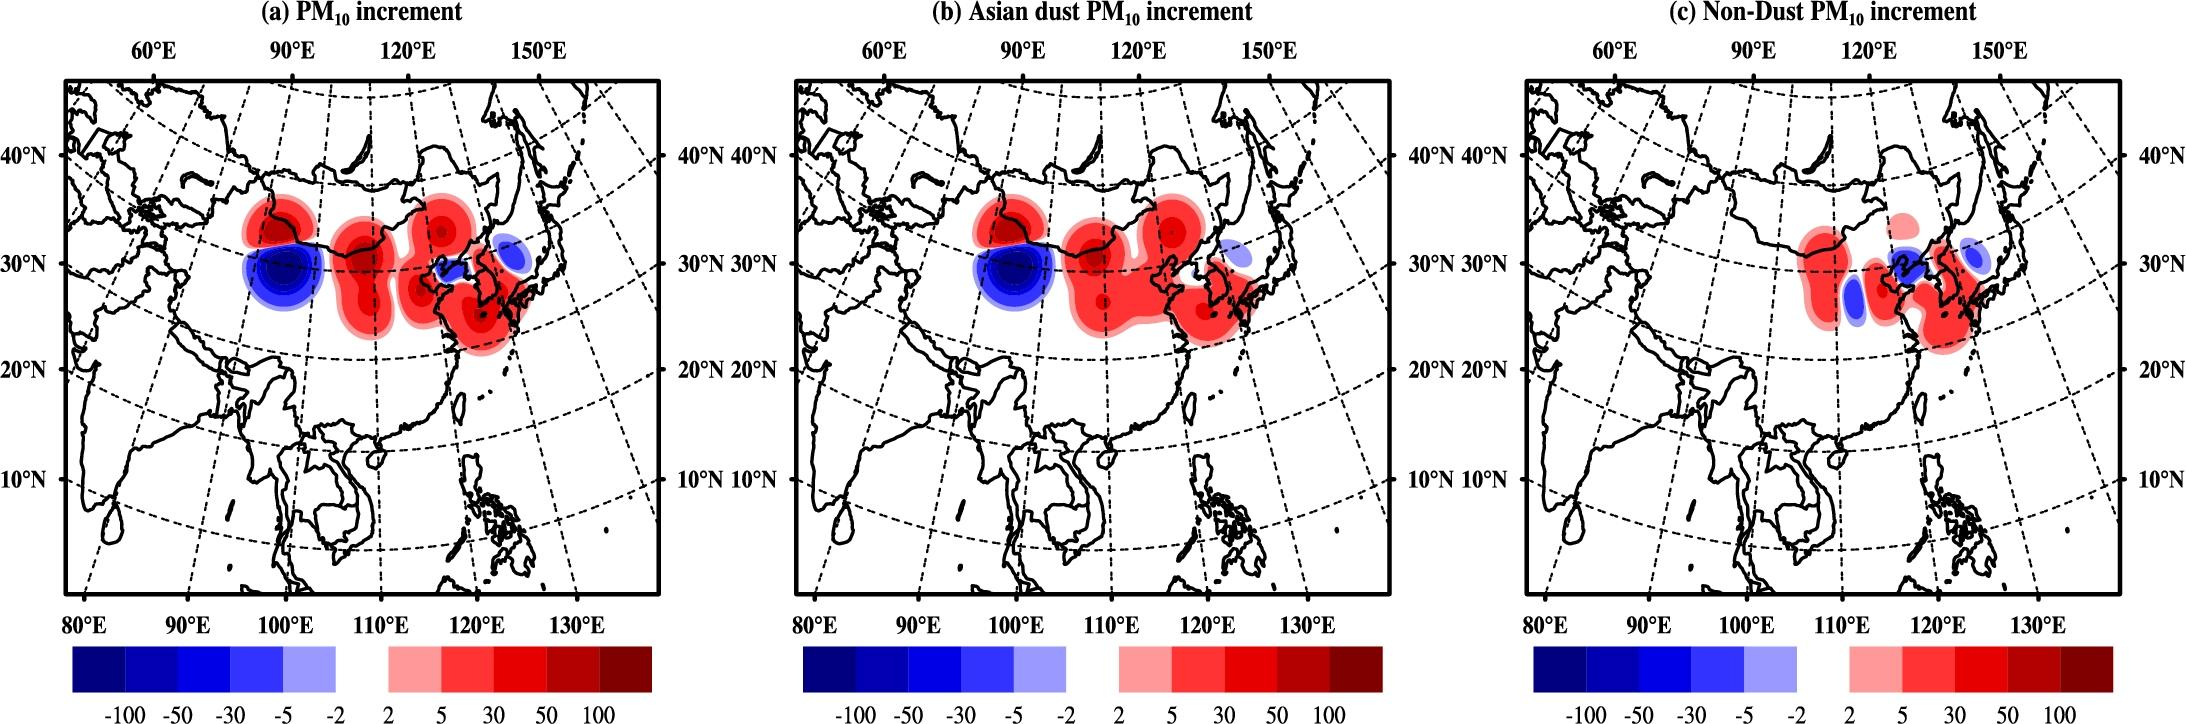 Fig. 3.2.12 The increment of (a) PM10, (b) Asian dust PM10, and (c) Non-dust PM10 concentration in the lowest model layer at 00 UTC 9 January, 2013 after the application of 3DOI.